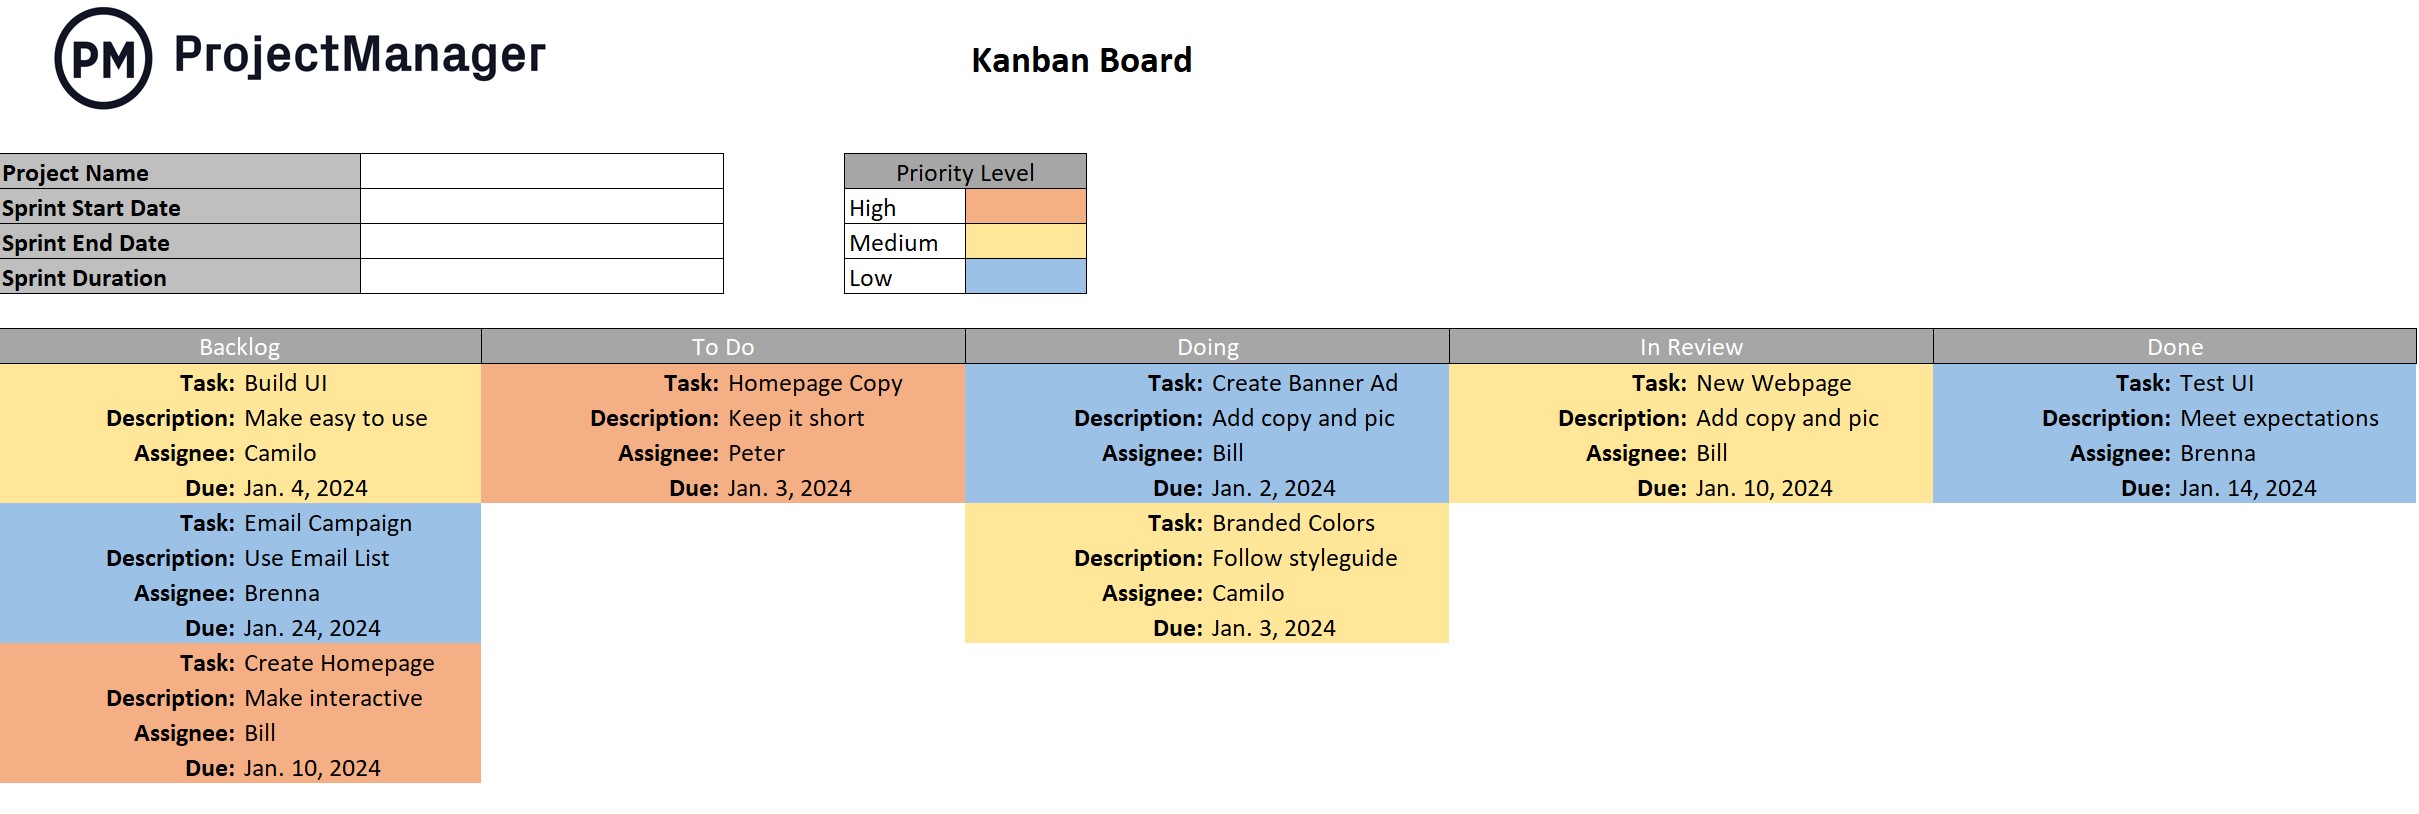 kanban-board-template-for-excel-free-download